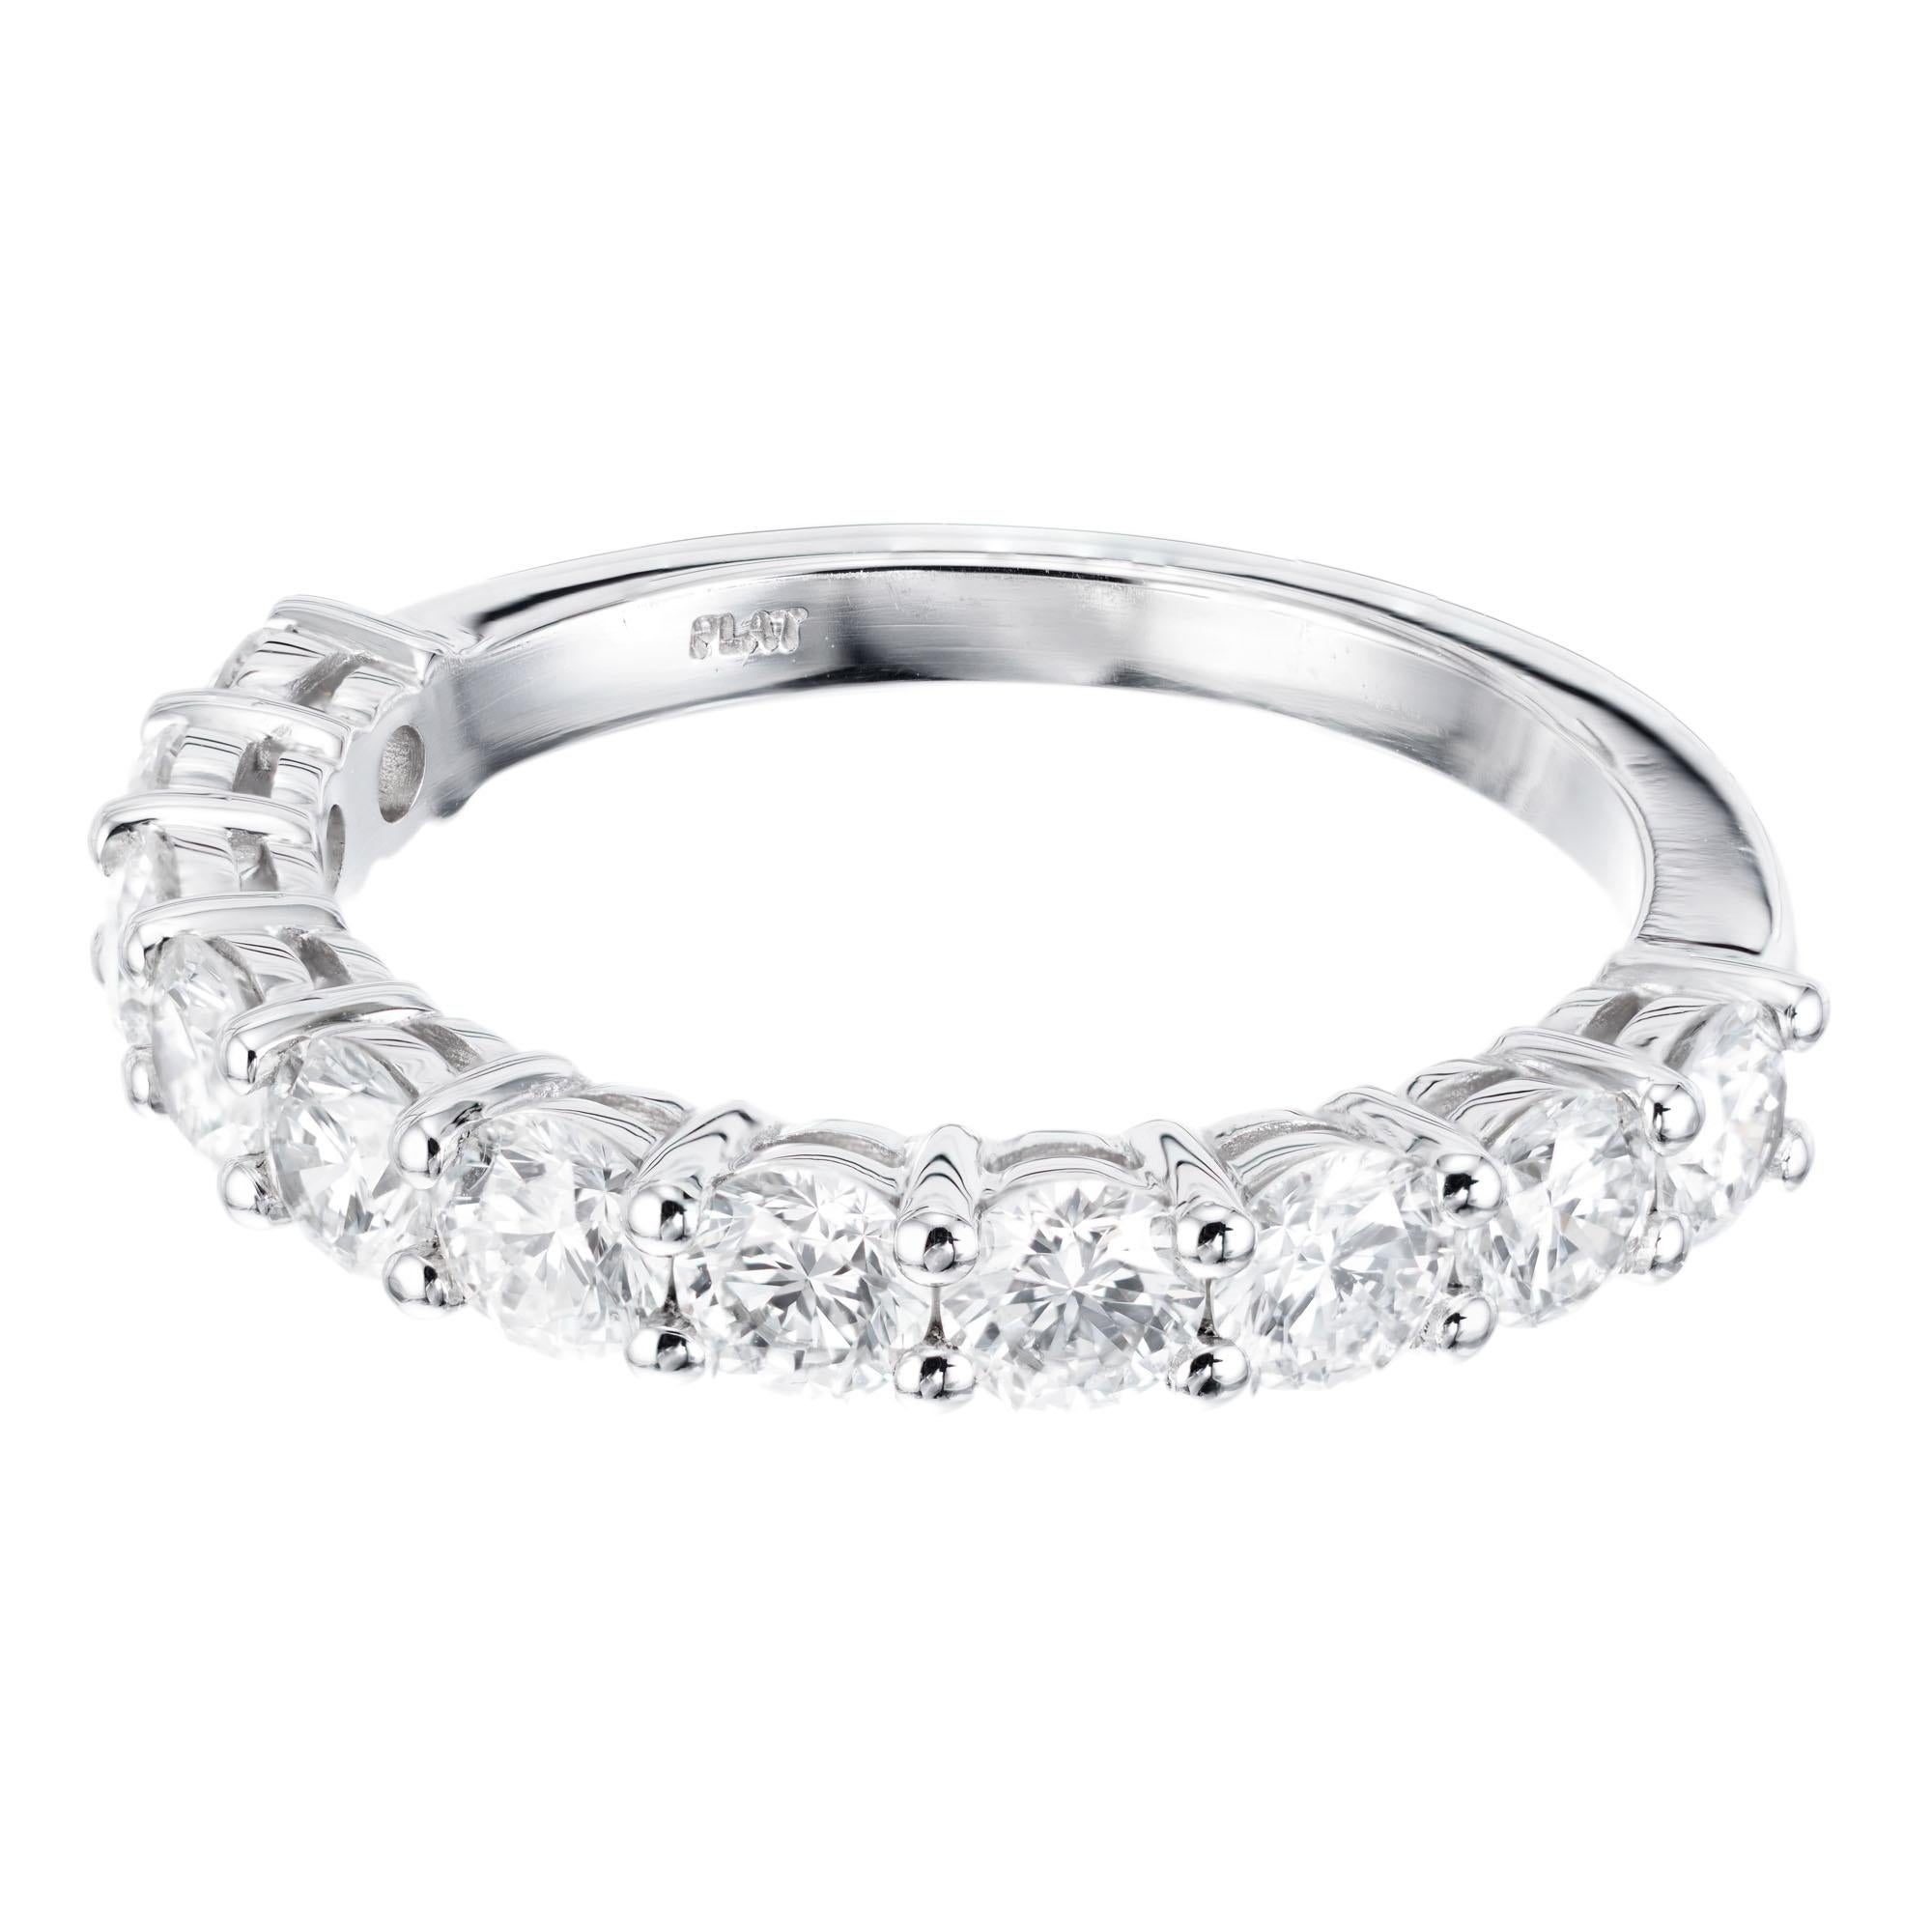 11 diamond common prong round brilliant cut wedding band ring set in platinum. Crafted in the Peter Suchy workshop

11 round brilliant cut diamonds G,VS-SI approx. 1.26cts
Size 6 and sizable
Platinum 
Stamped: PLAT
4.4 grams
Width at top: